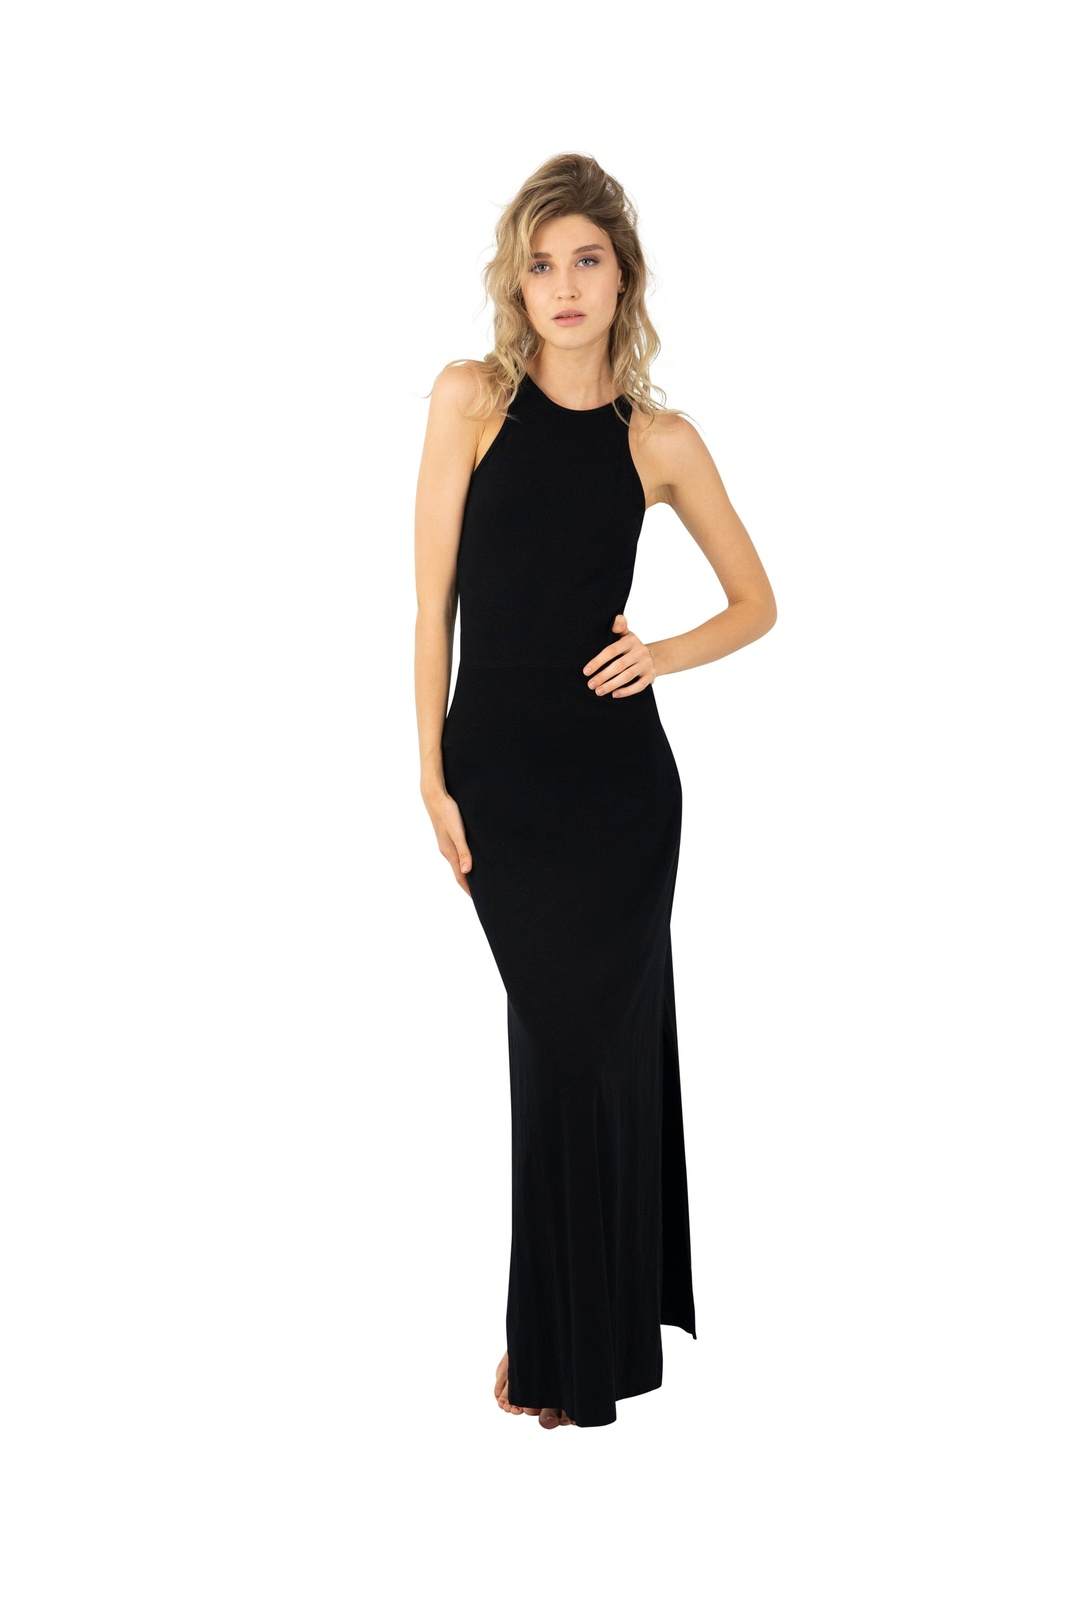 Ladies casual maxi dresses by Ekoluxe Best Sustainable Fashion Brands